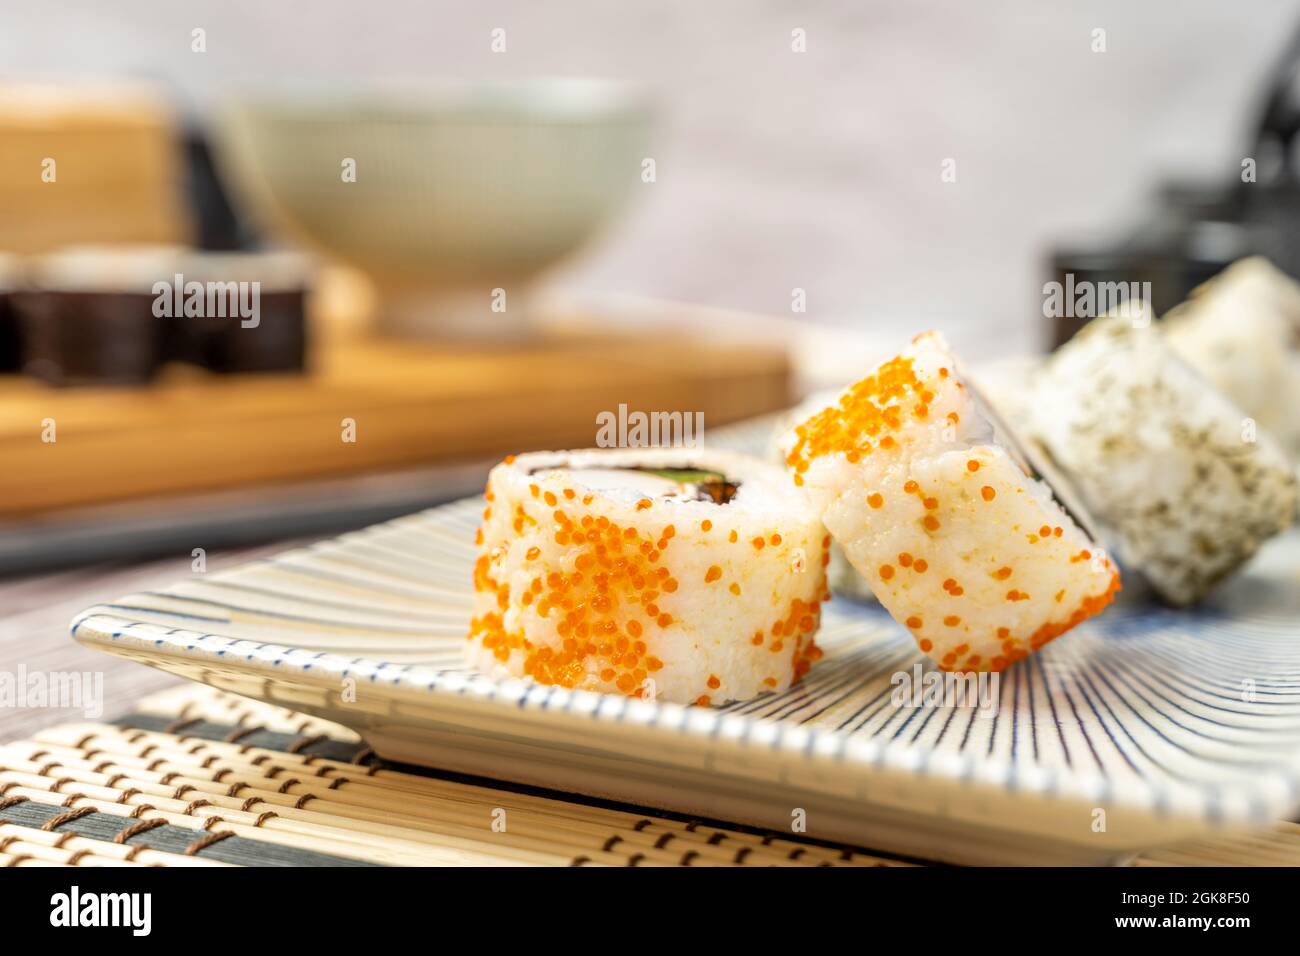 Close-up of uramaki california roll with orange fish roe on a grated plate Stock Photo